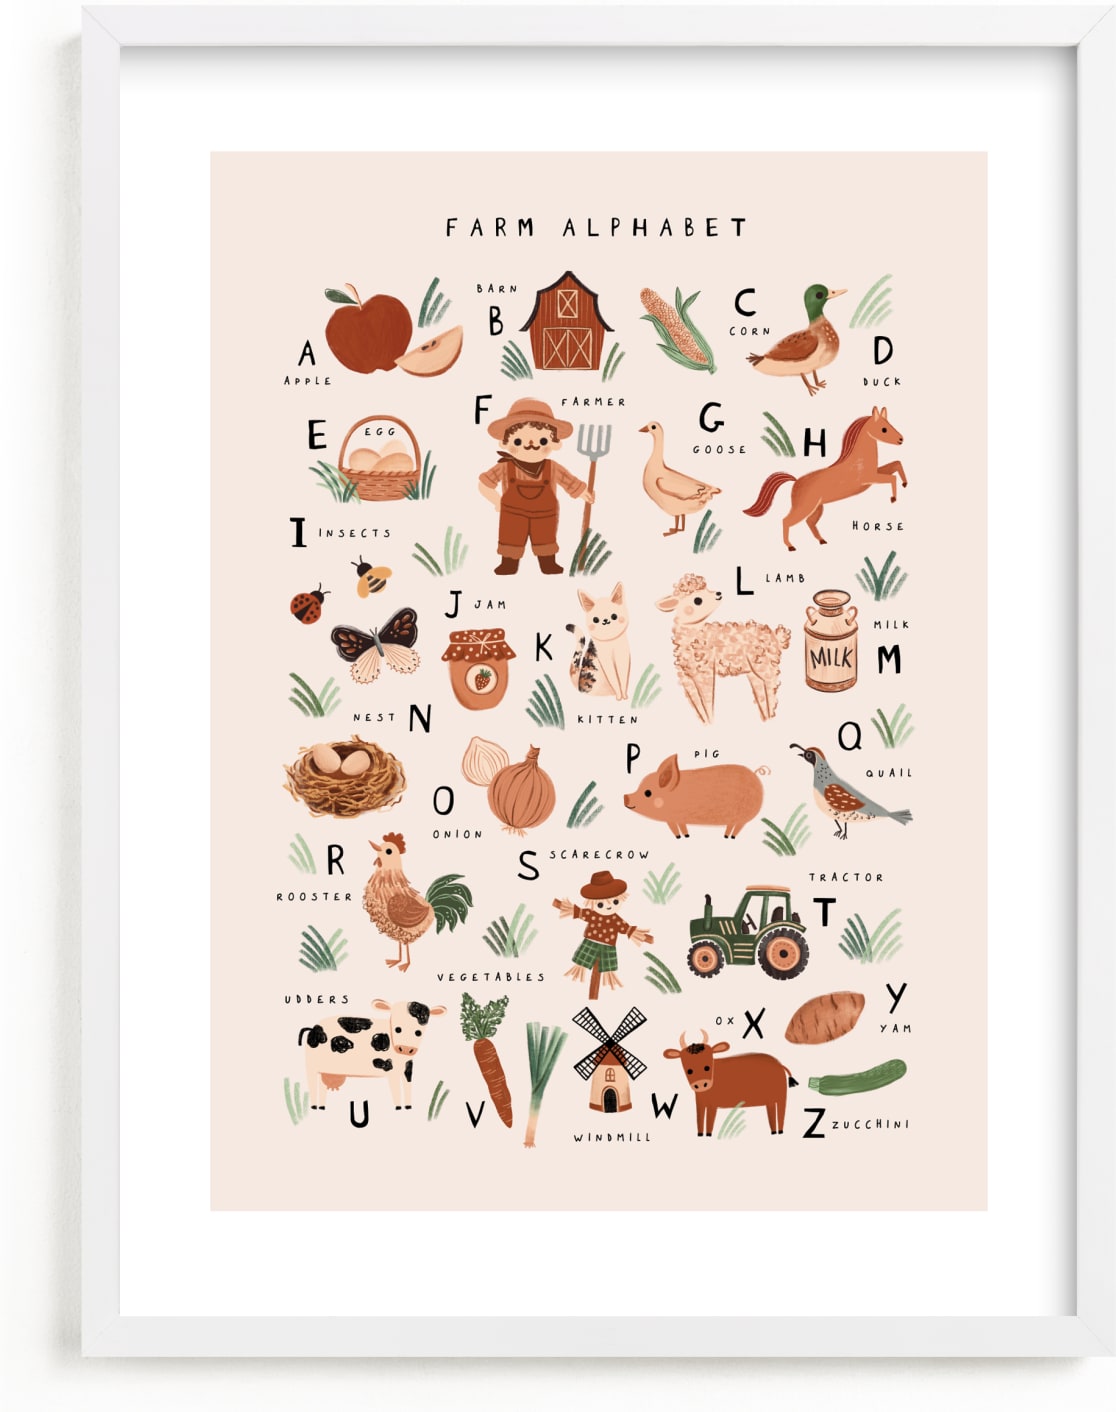 This is a brown nursery wall art by Vivian Yiwing called Farm Alphabet.